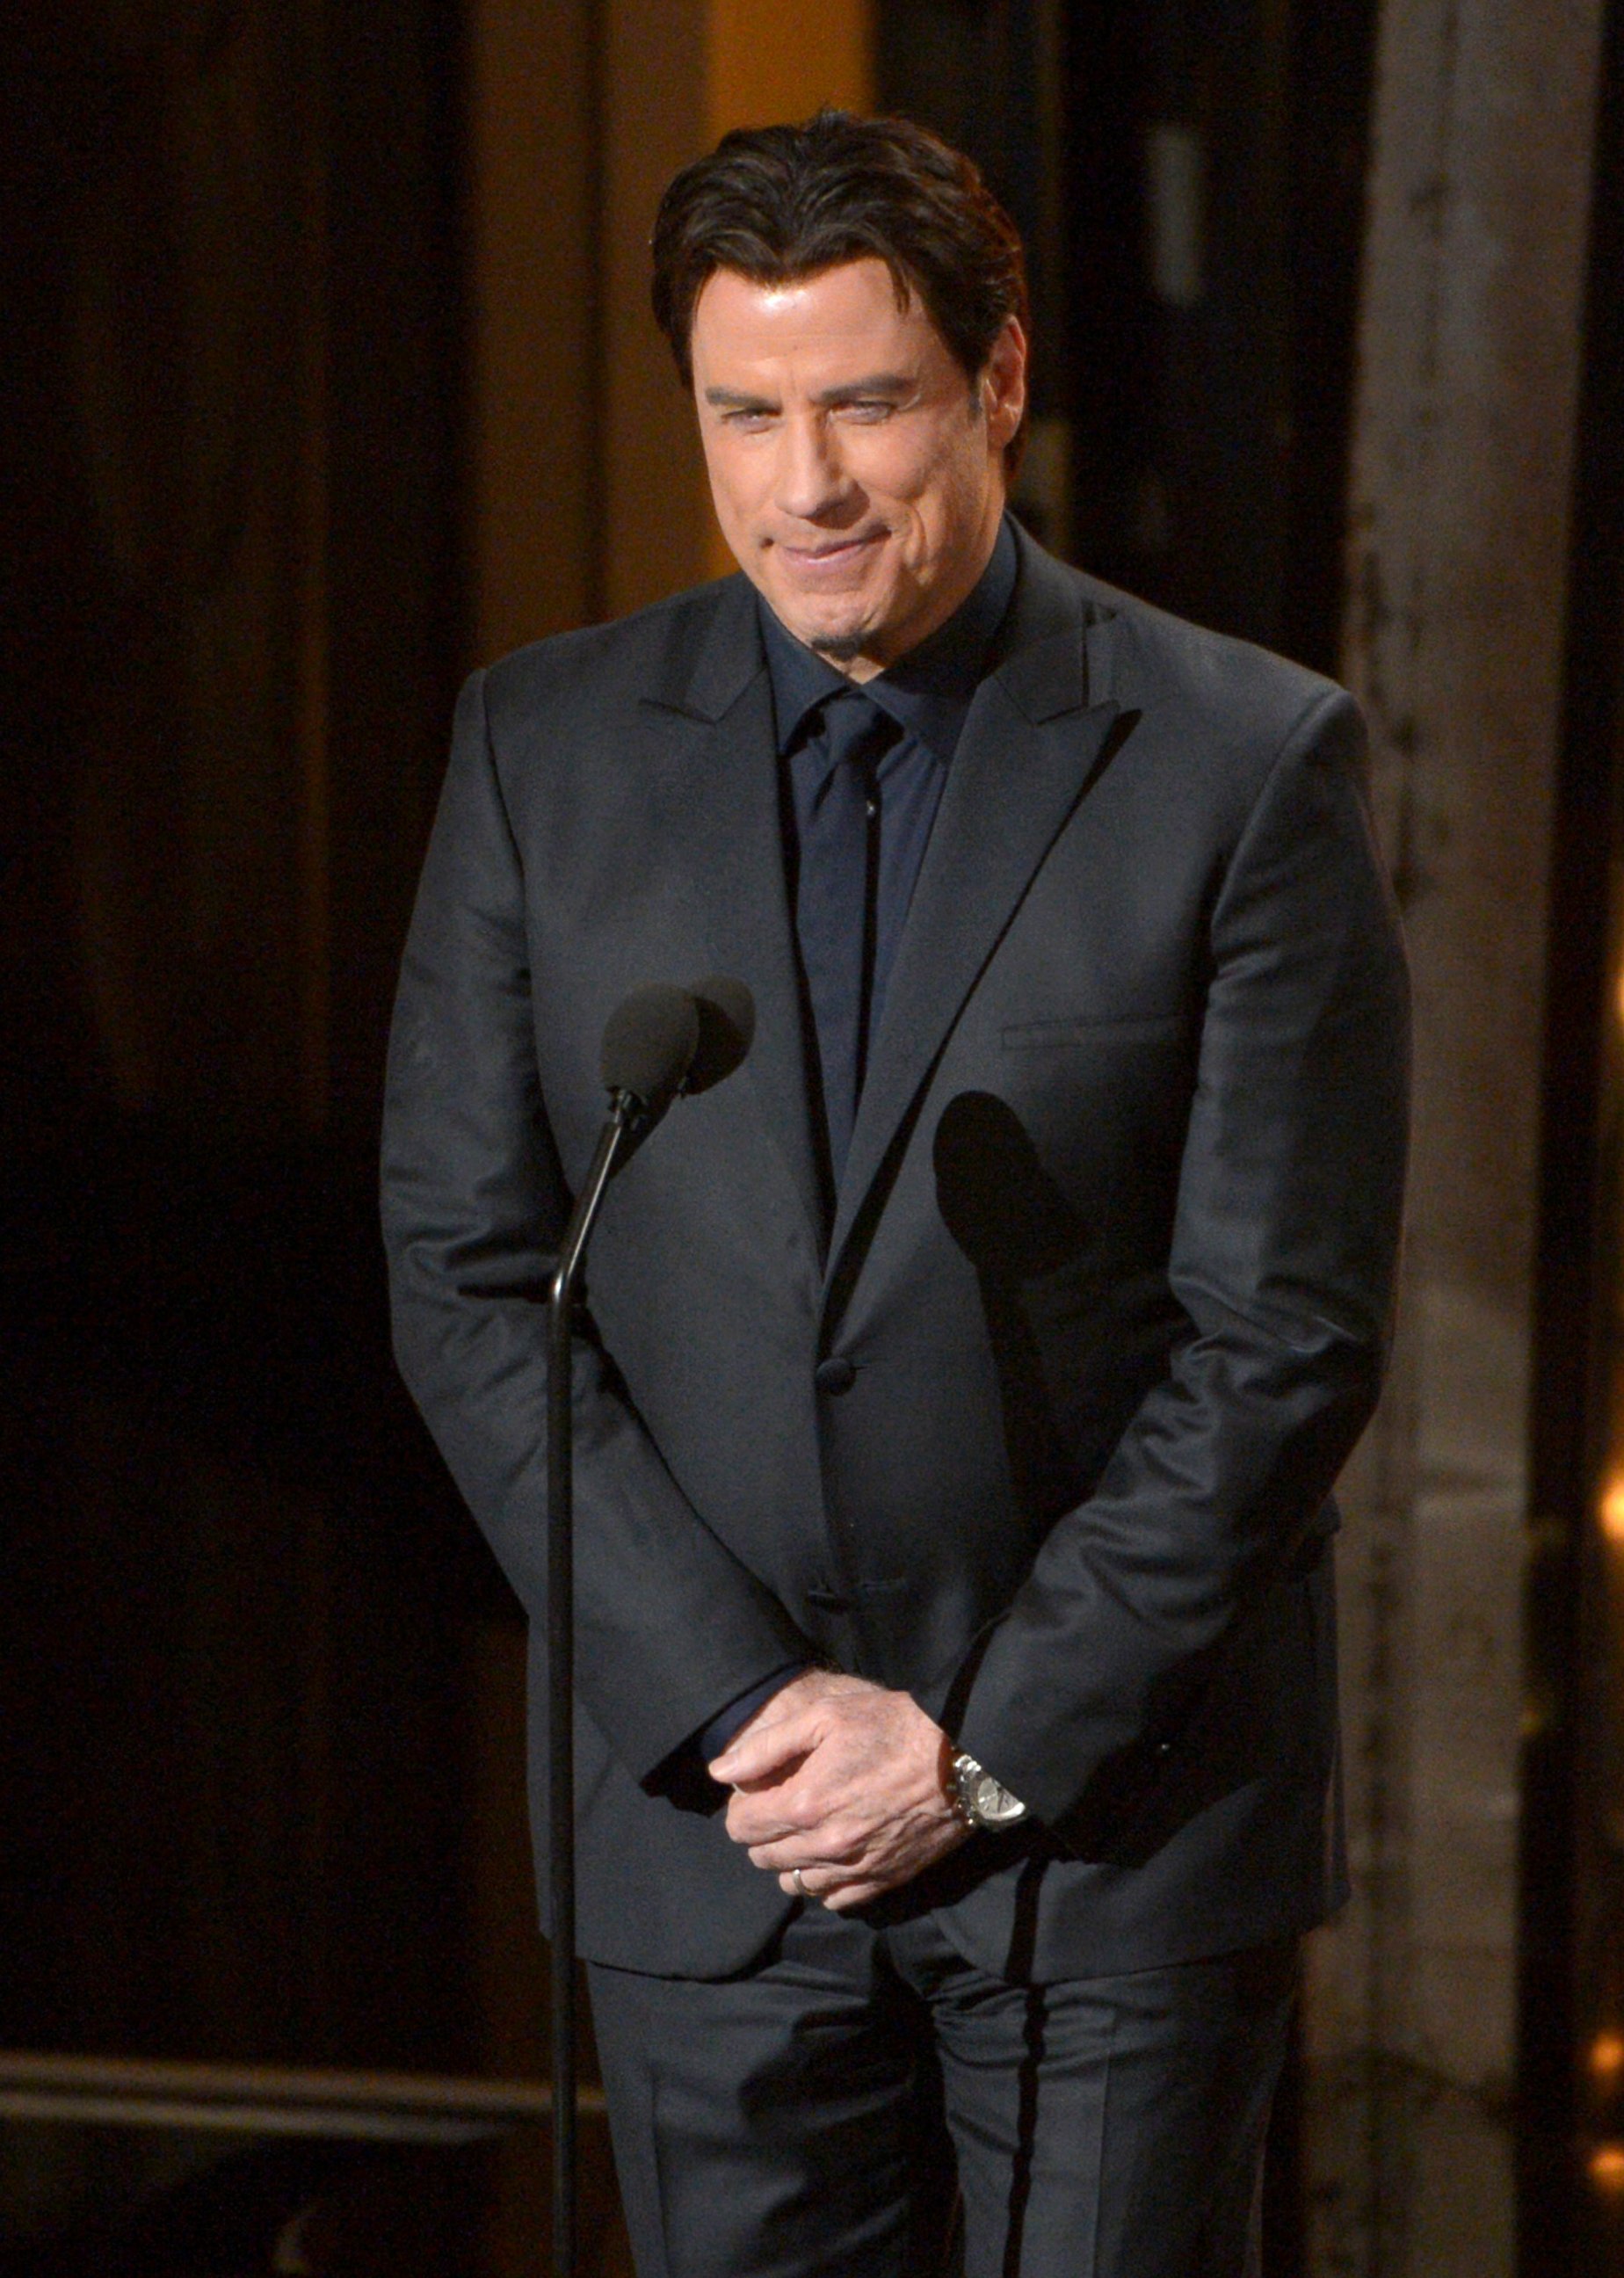 PHOTO: John Travolta speaks during the Oscars at the Dolby Theatre, March 2, 2014 in Los Angeles.